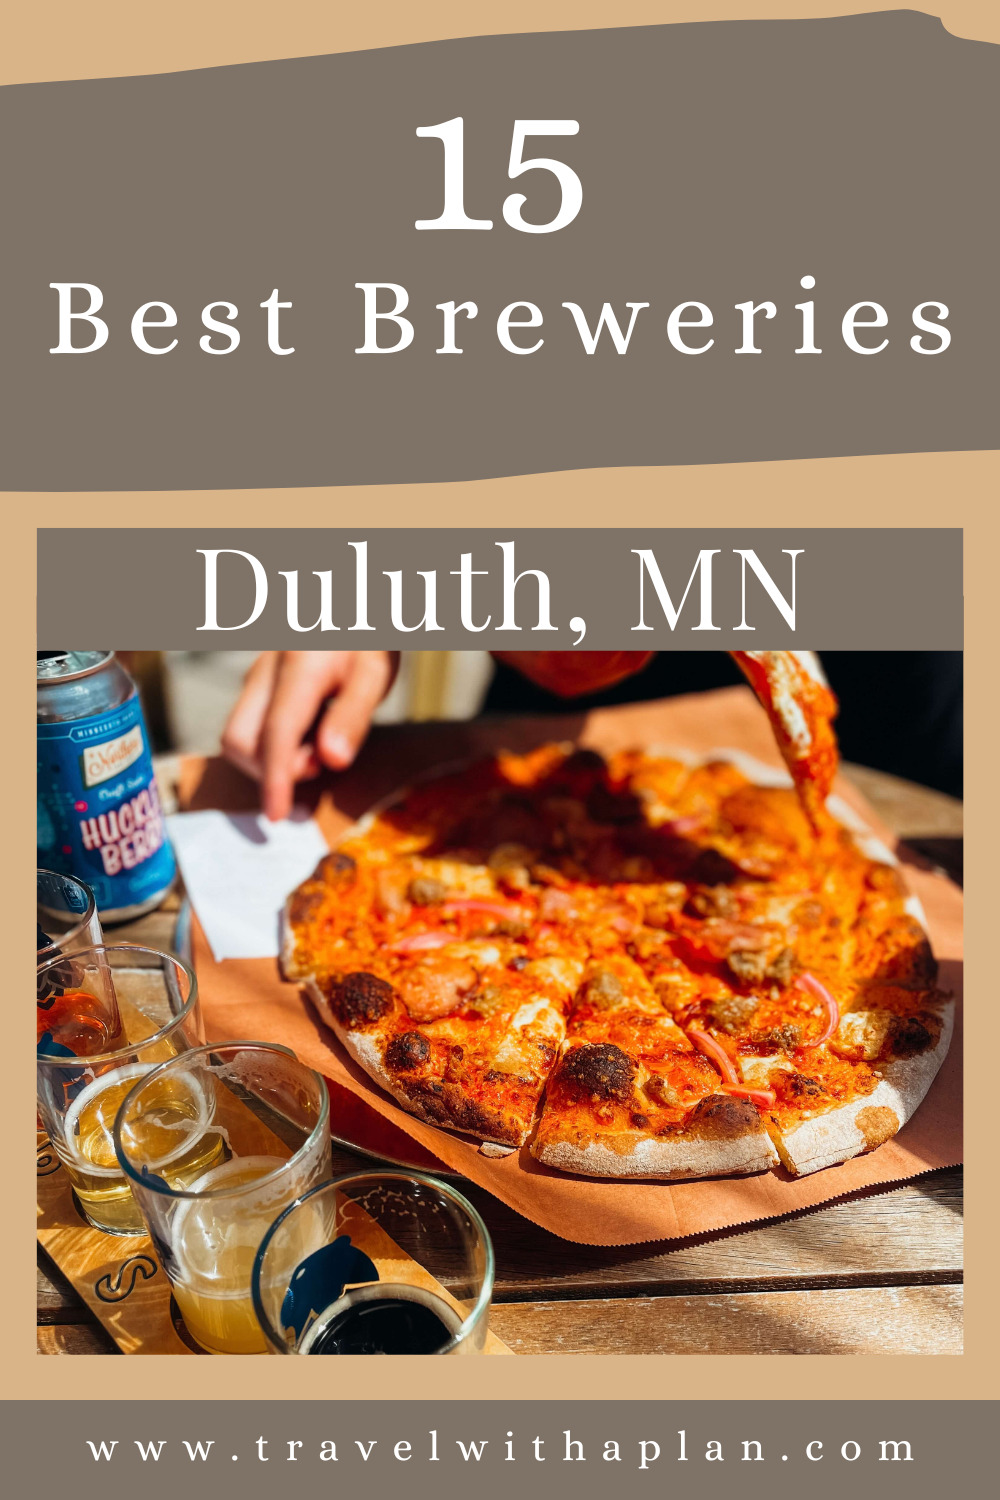 Check out the 15 best breweries in Duluth, MN!  These include the Duluth breweries with food, as well as Duluth cideries!  Start planning your Duluth, Minnesota getaway today!  #DuluthMN #Duluthbeer